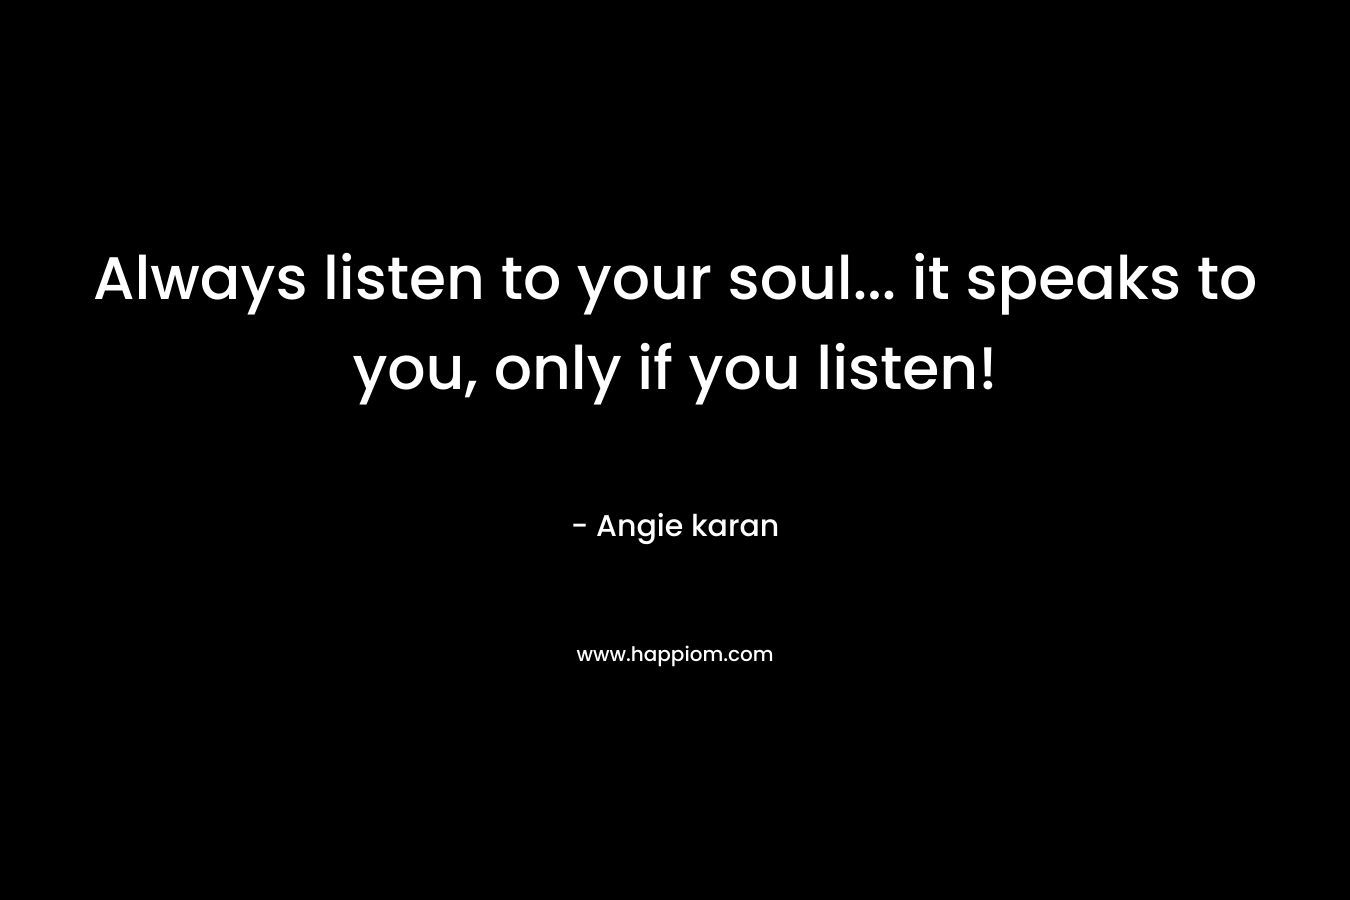 Always listen to your soul... it speaks to you, only if you listen!